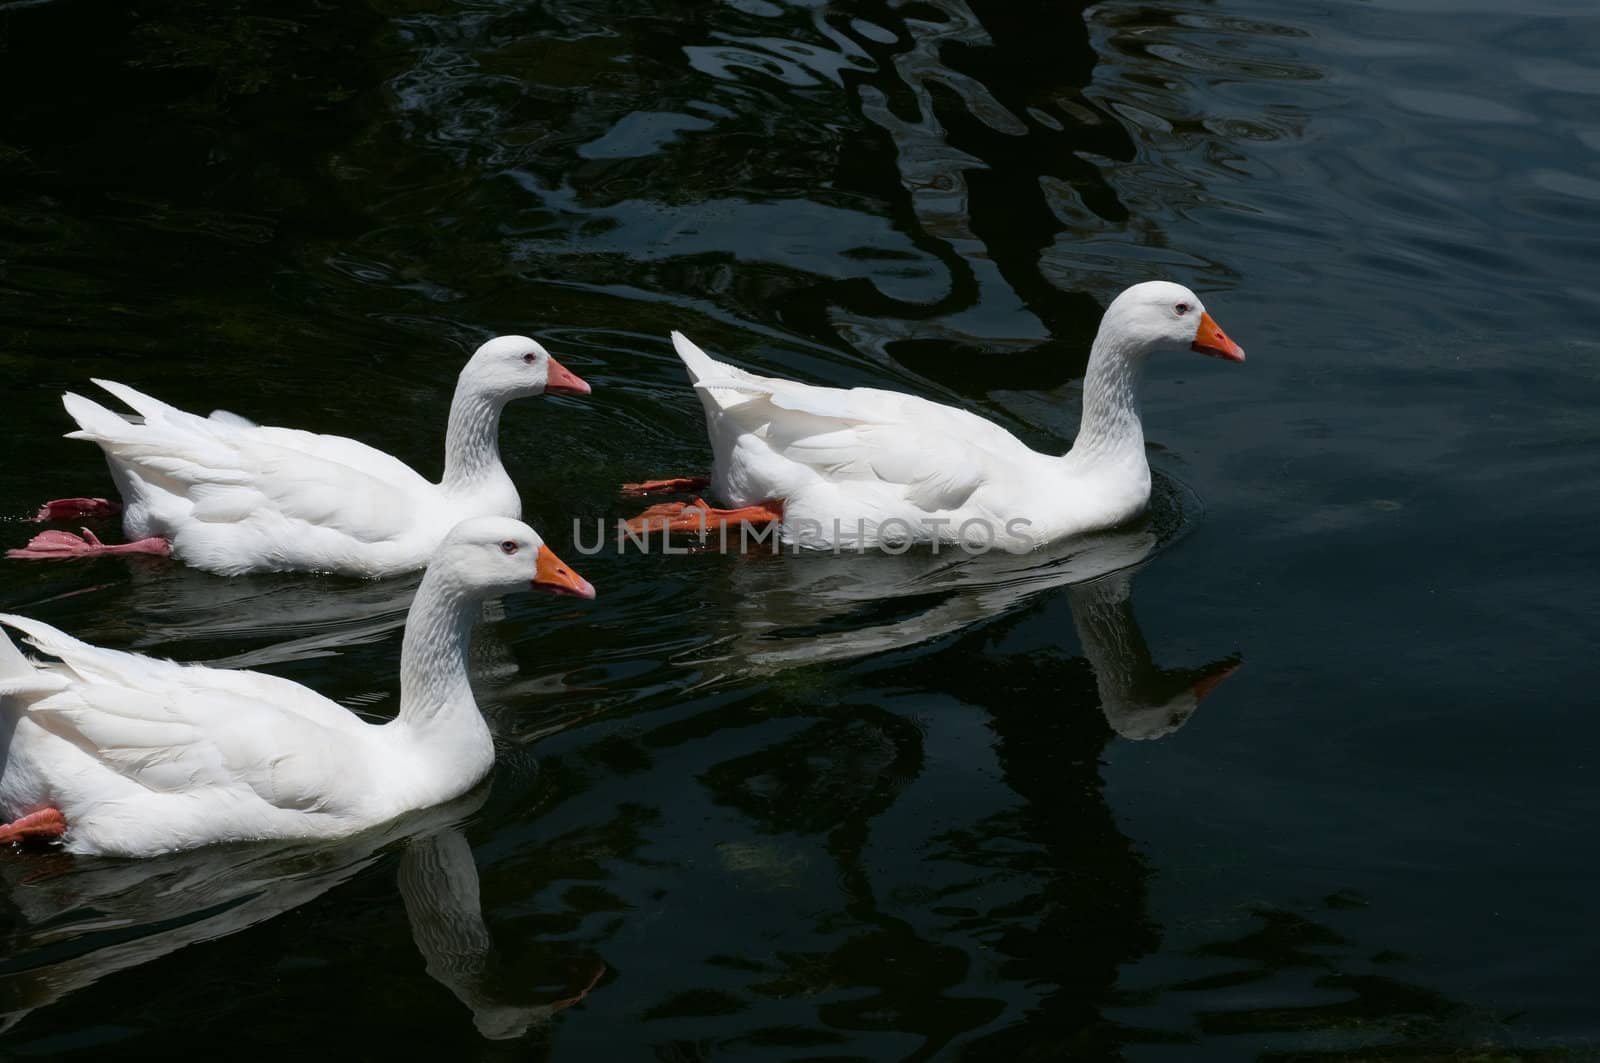 Three geese in pond